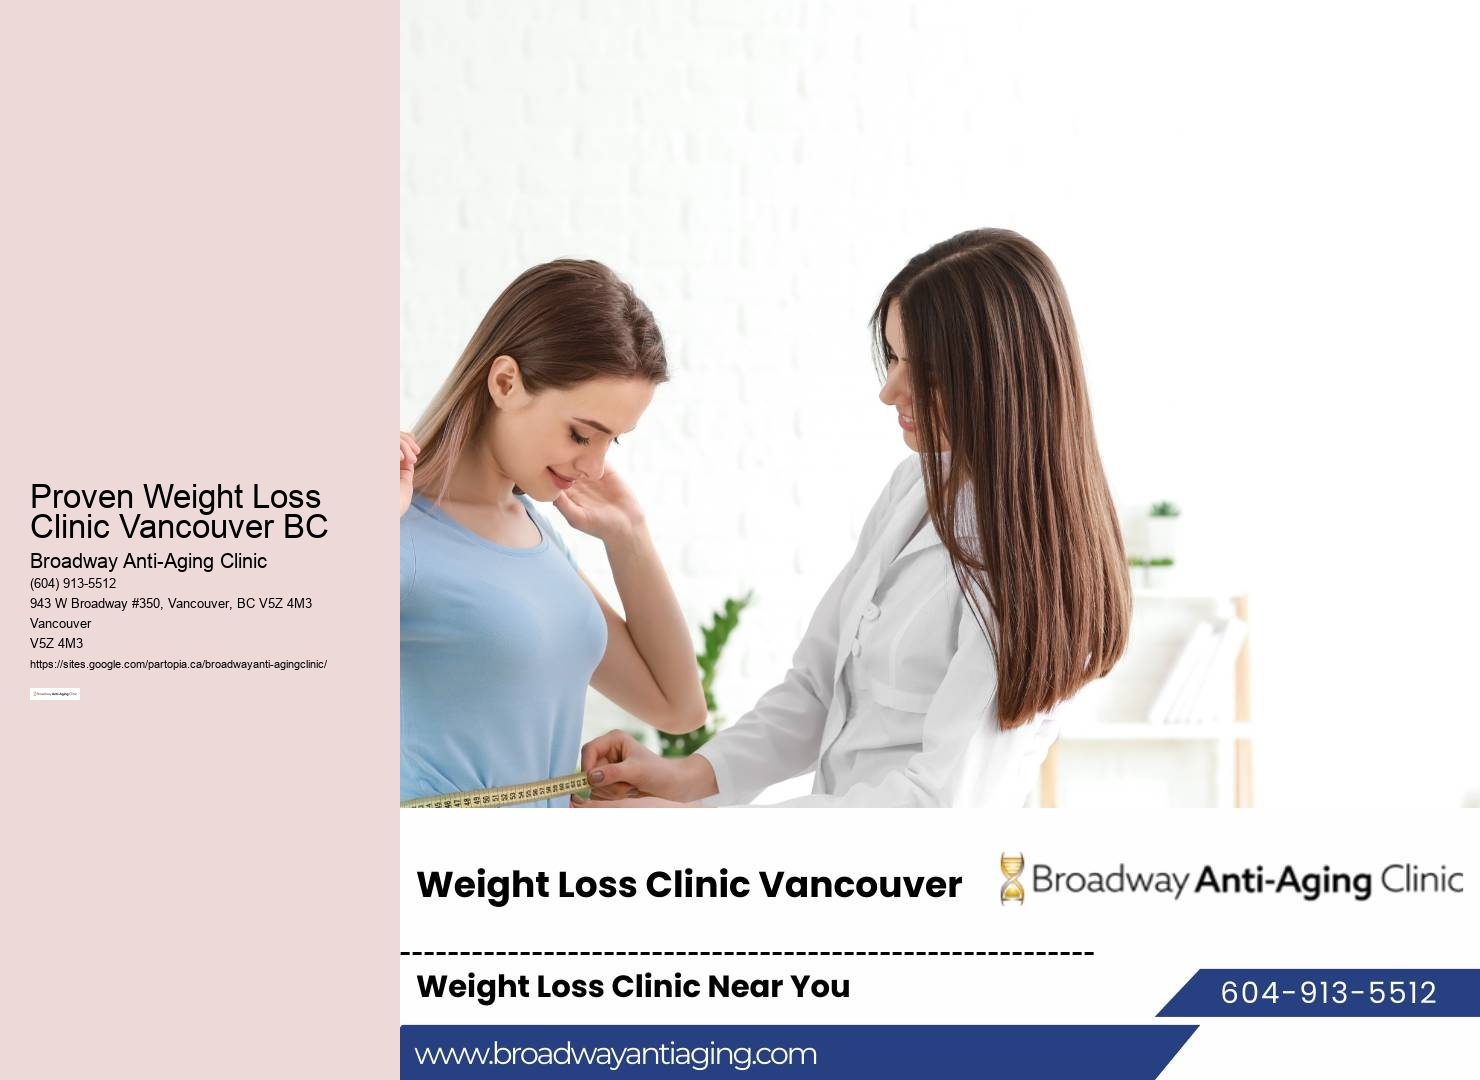 Proven Weight Loss Clinic Vancouver BC